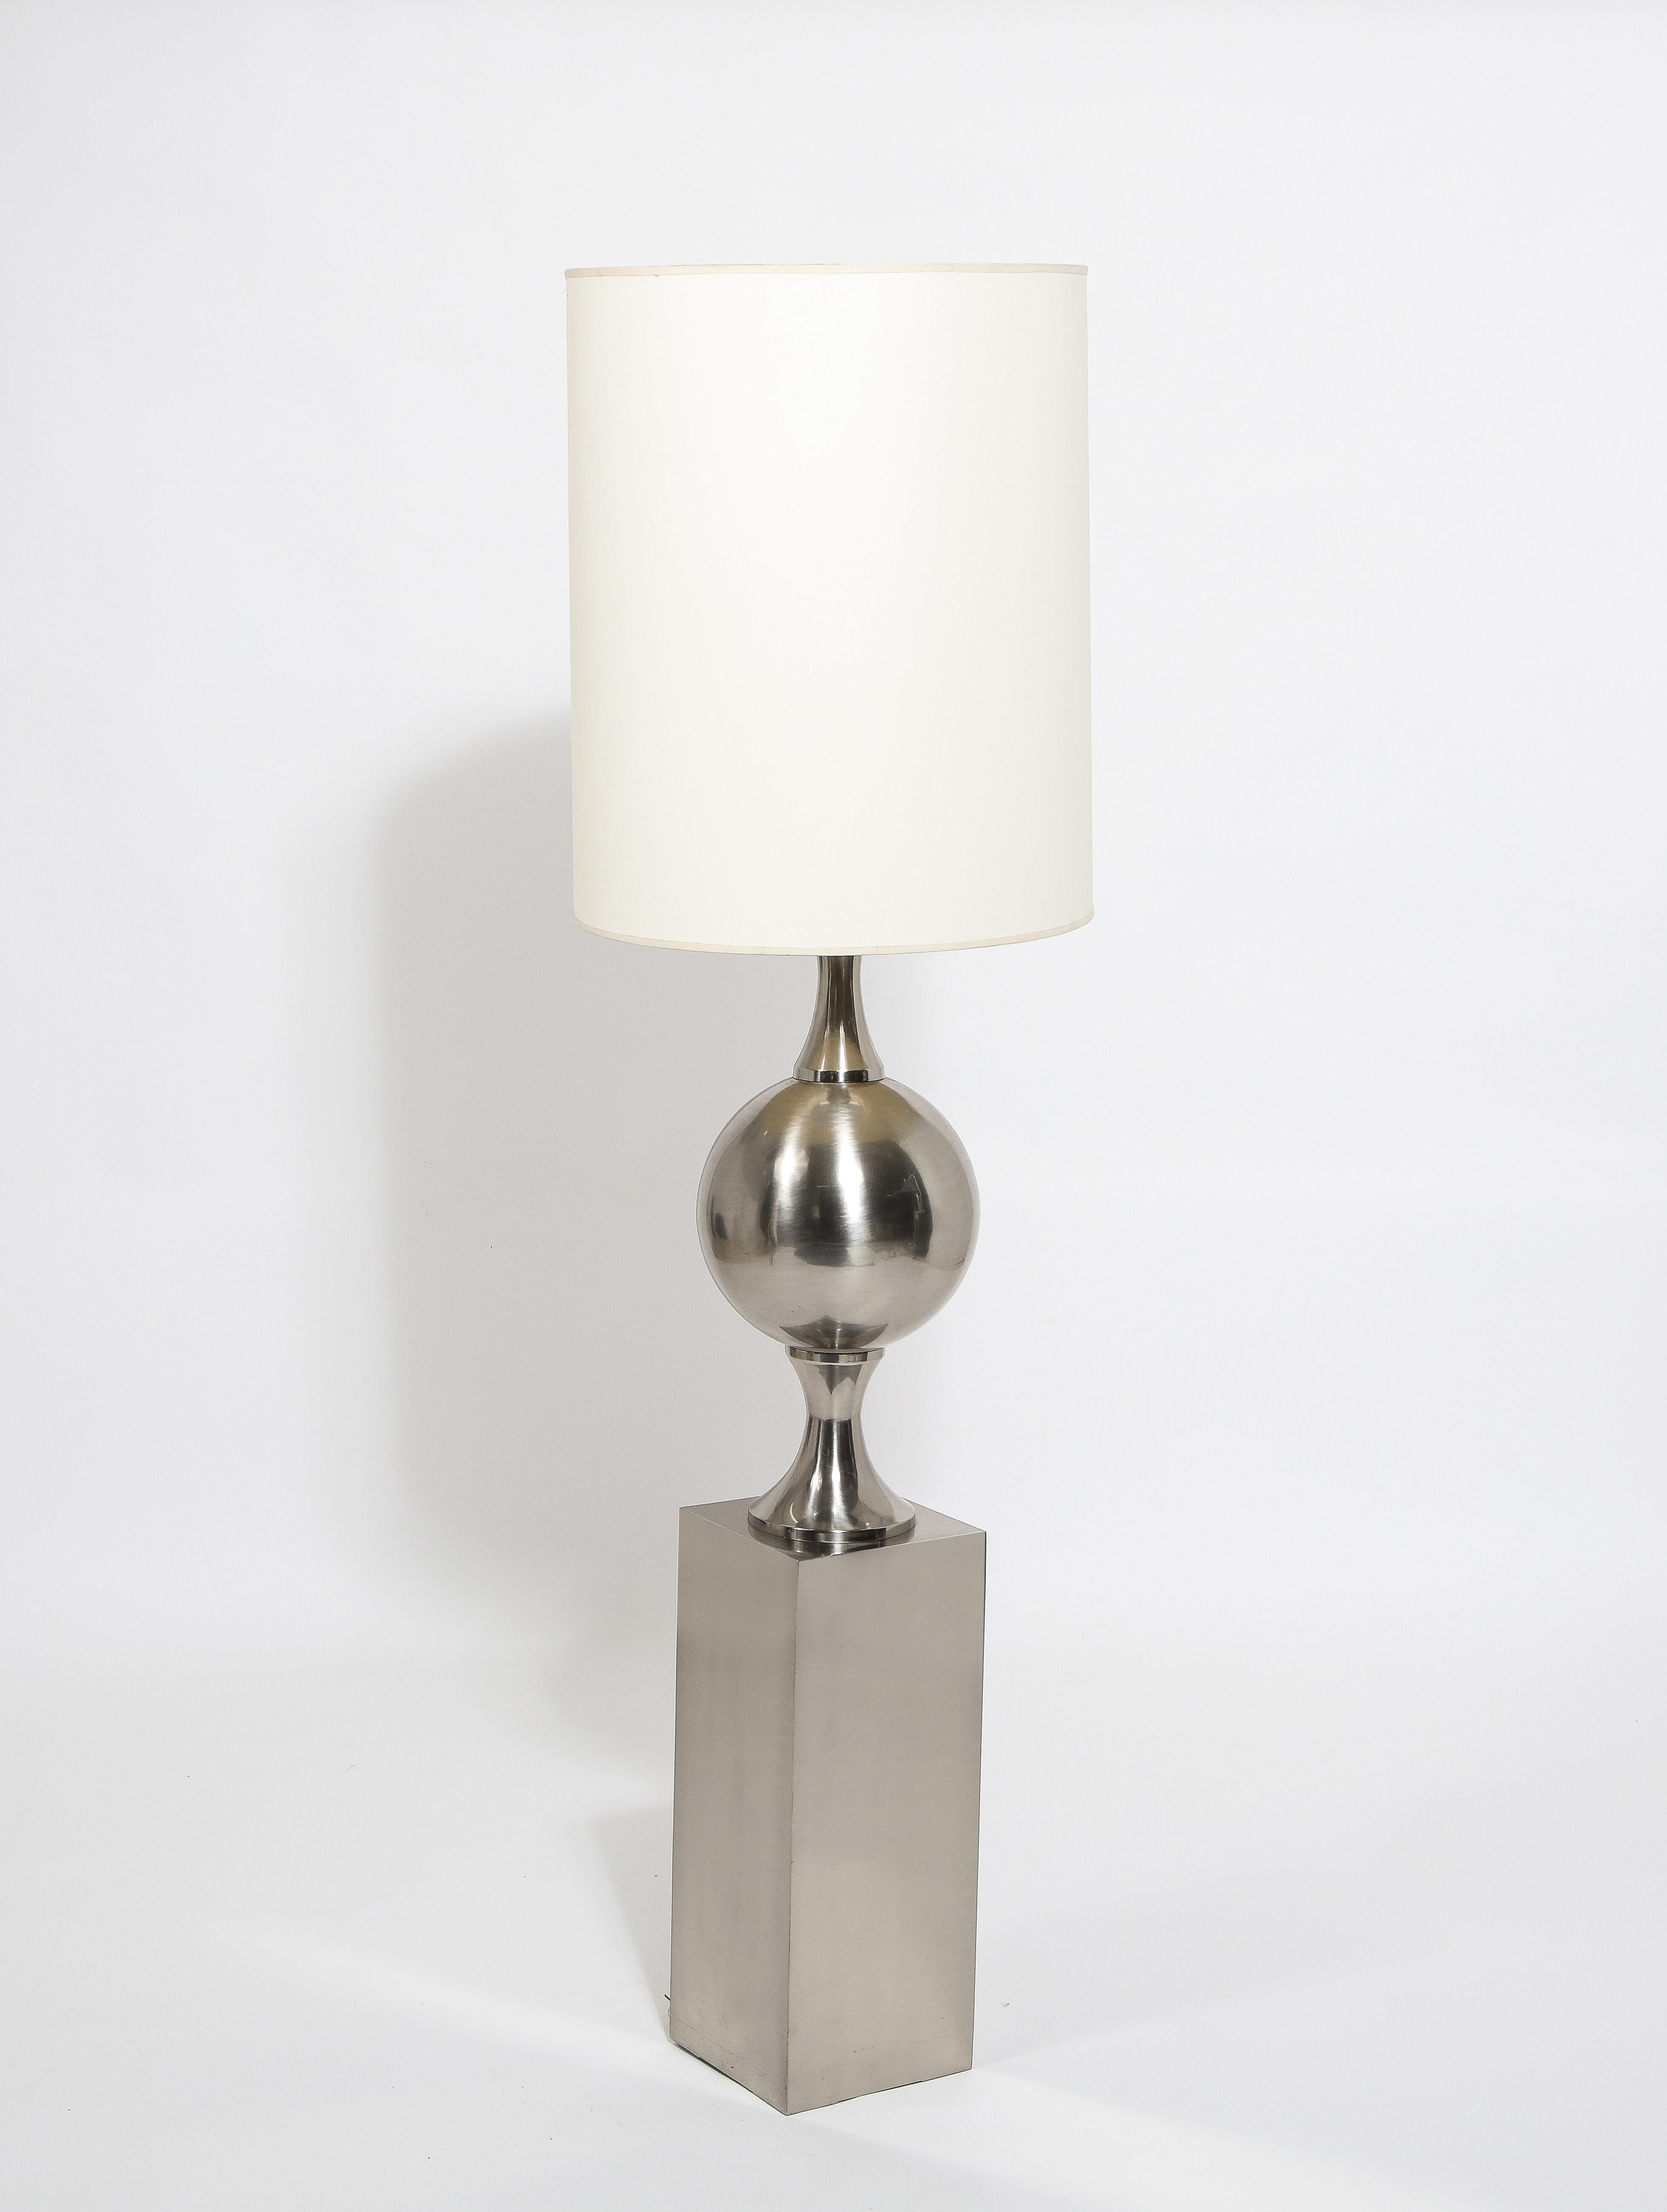 20th Century Barbier Floor Lamp in Nickel Plated Brass, France 1970's For Sale